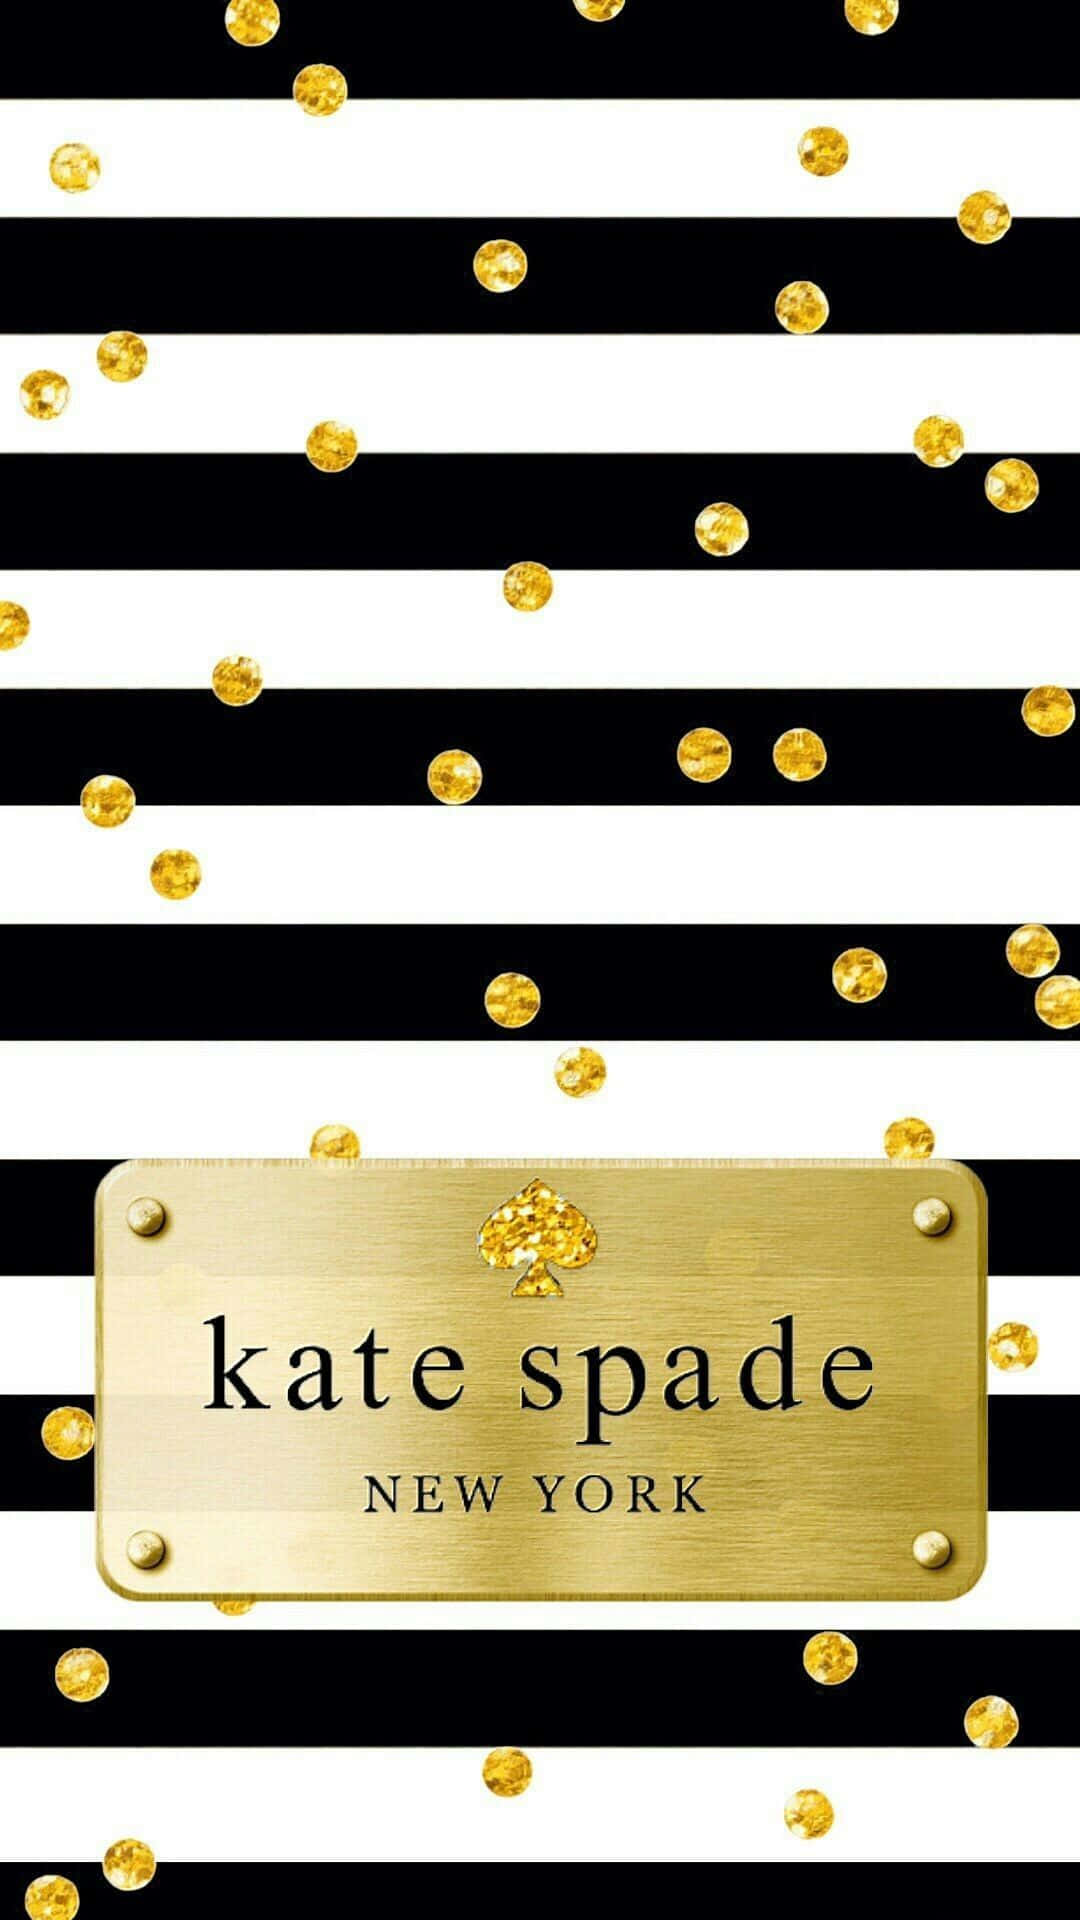 "Make Life Colorful With Kate Spade"